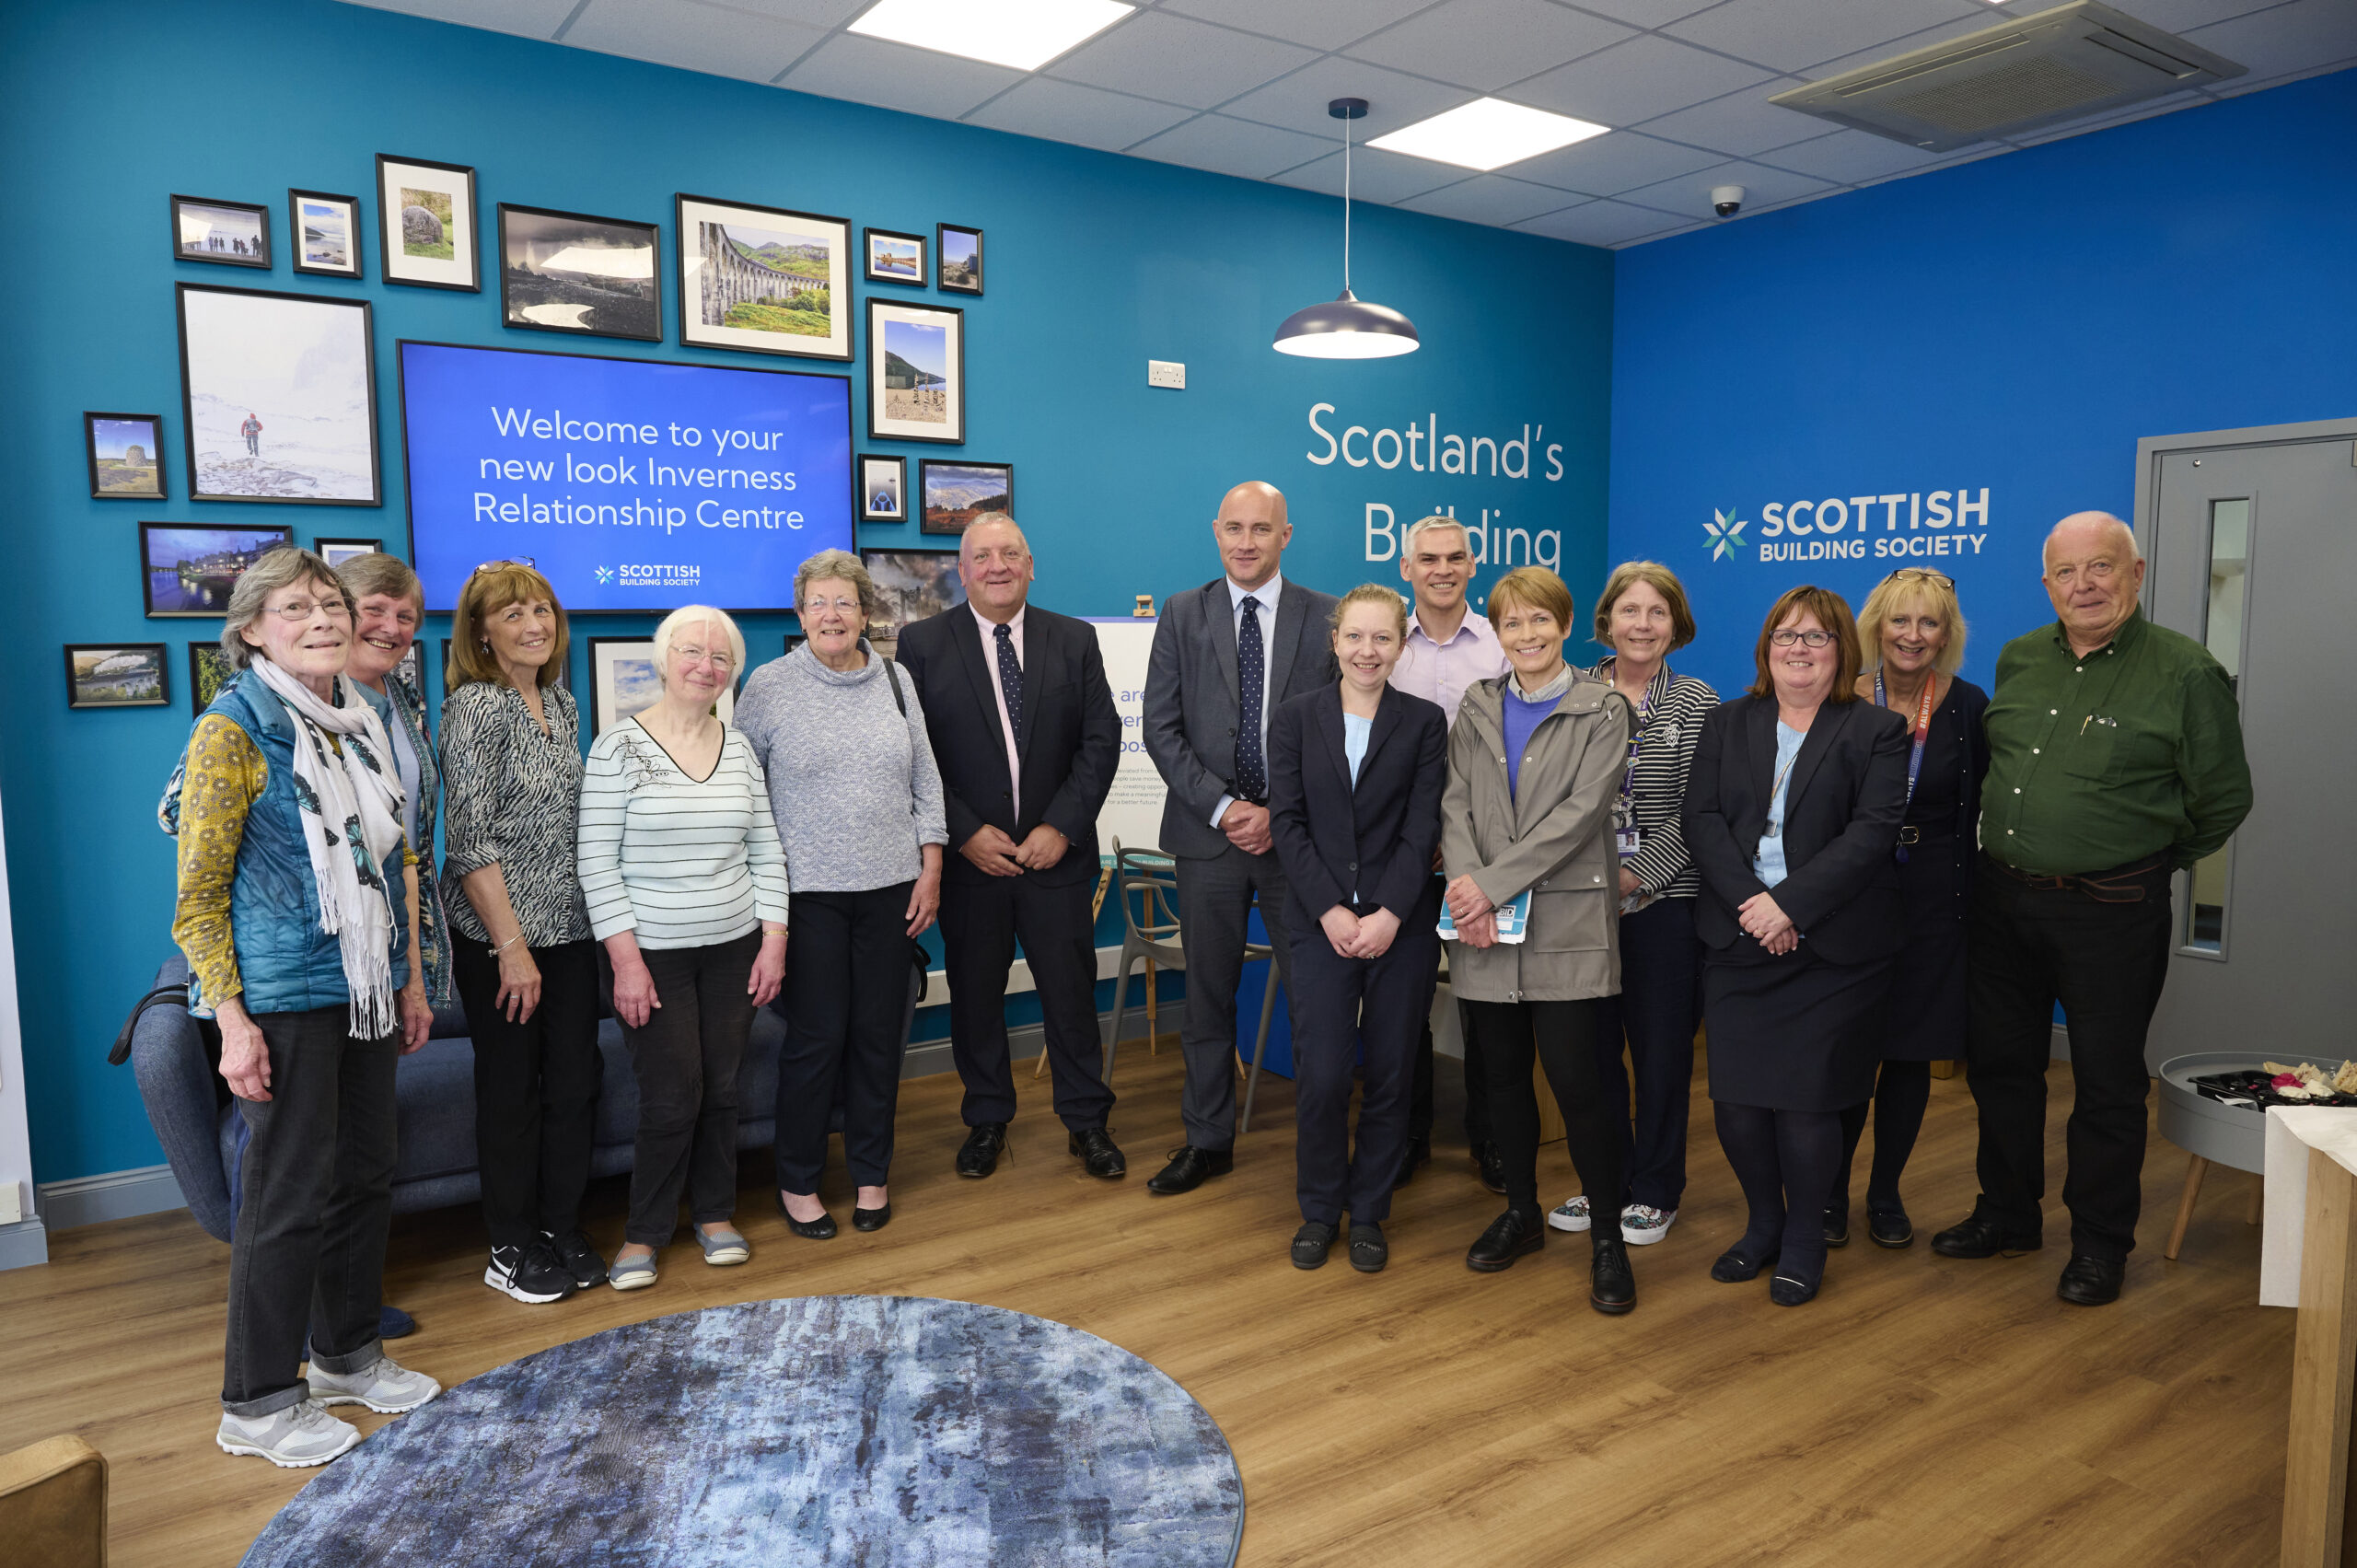 Scottish Building Society celebrates refreshed branch look and investment in Inverness